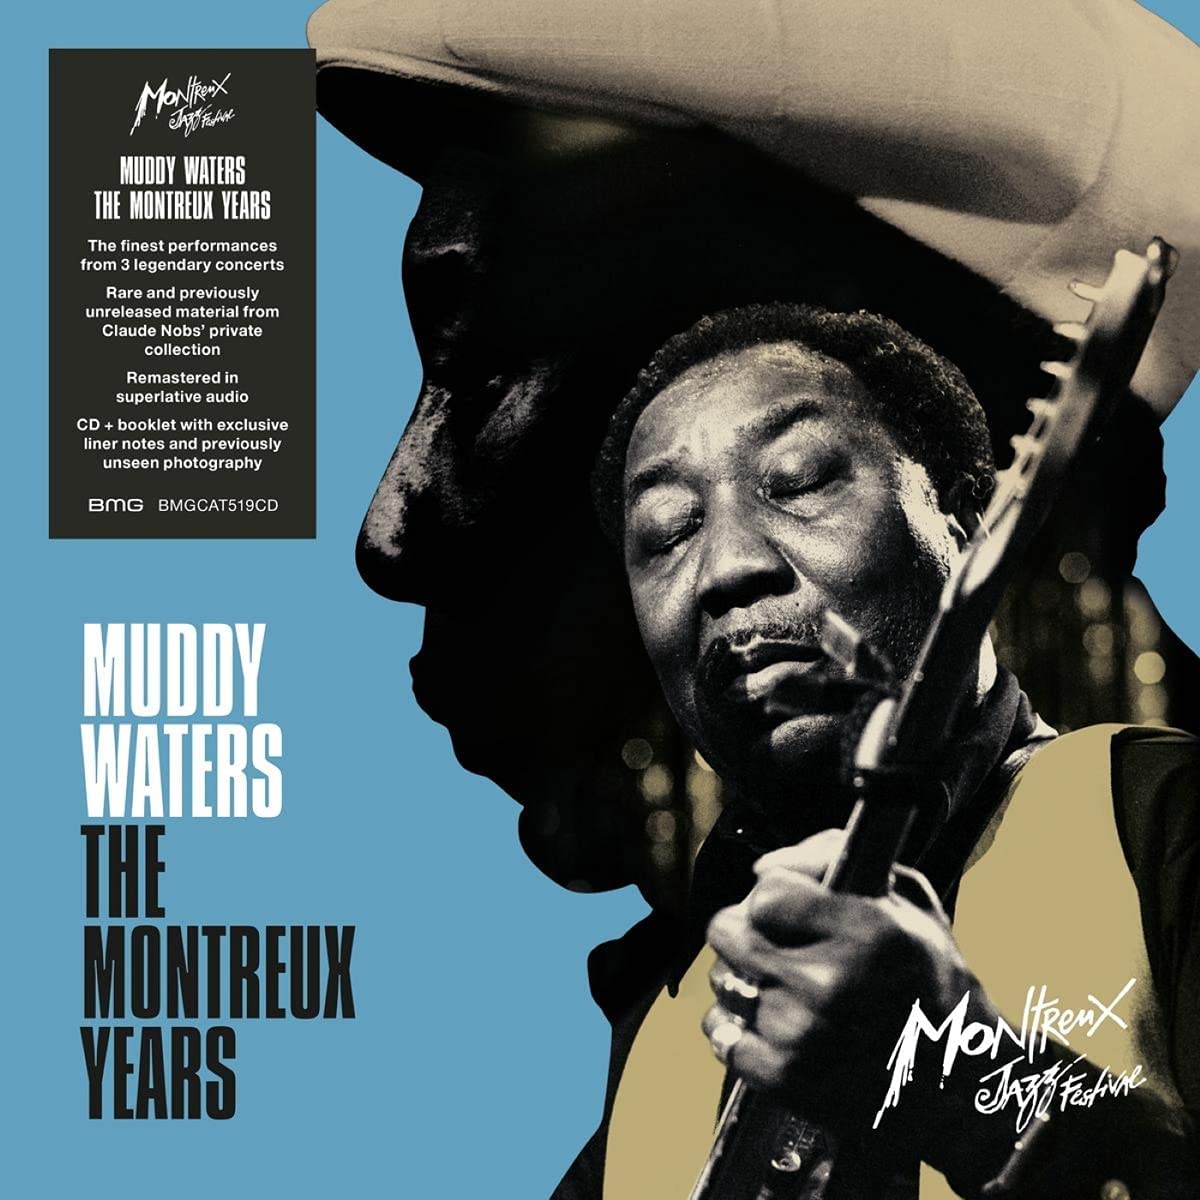 Muddy Waters - The Montreux Years - 2LP